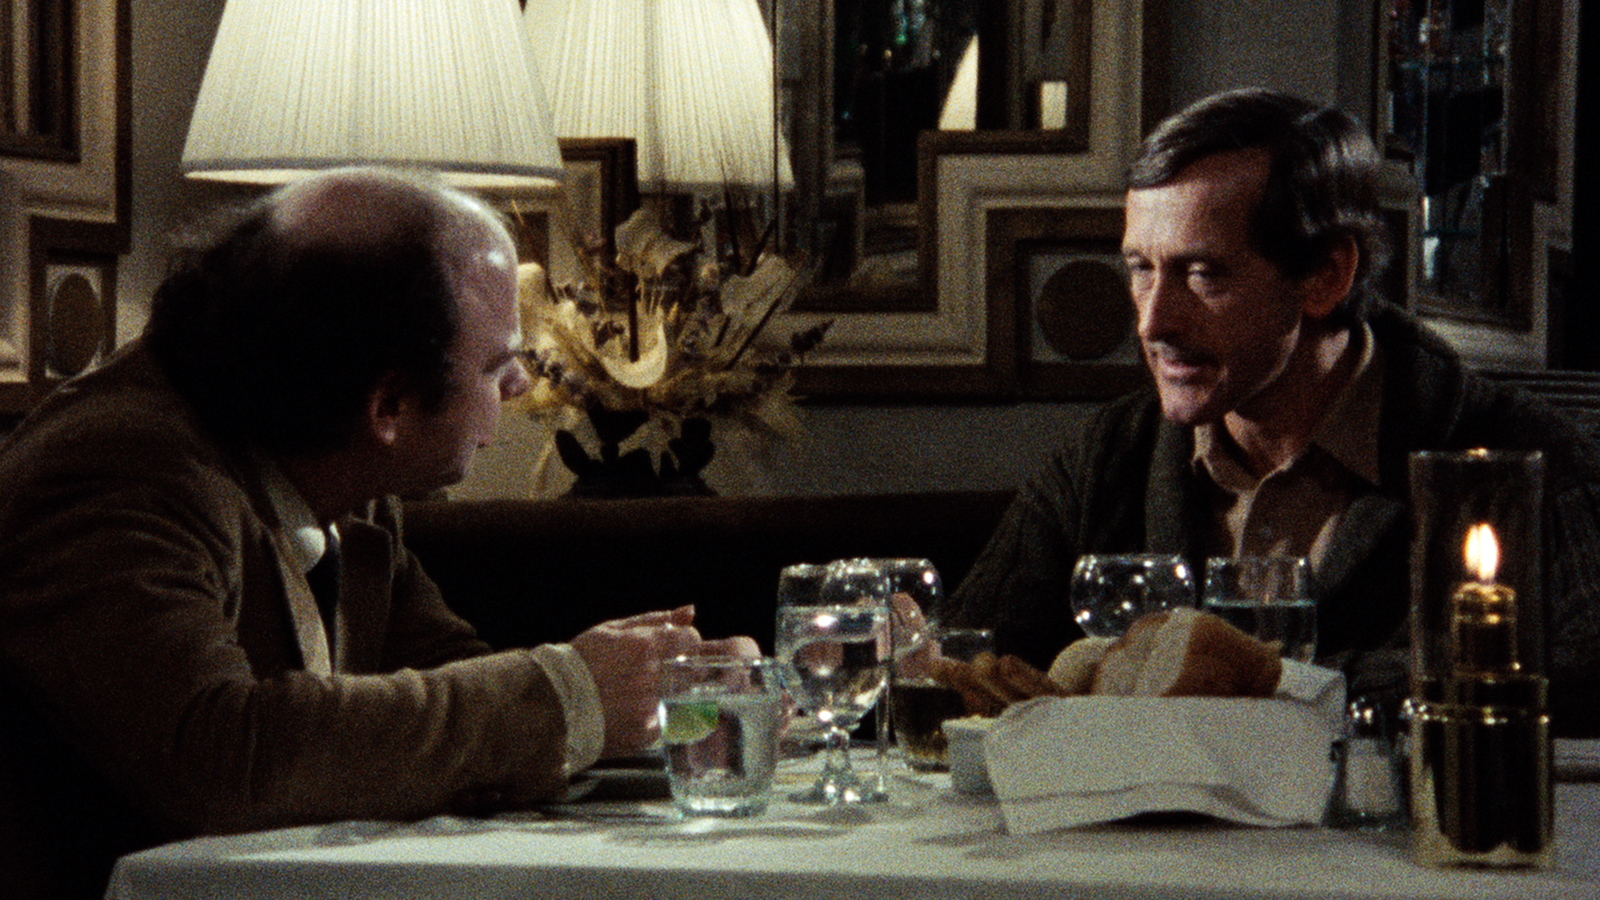 Michael Oakeshott, Susan Wolf, Conversation, and Louis Malle’s “My Dinner with André.”